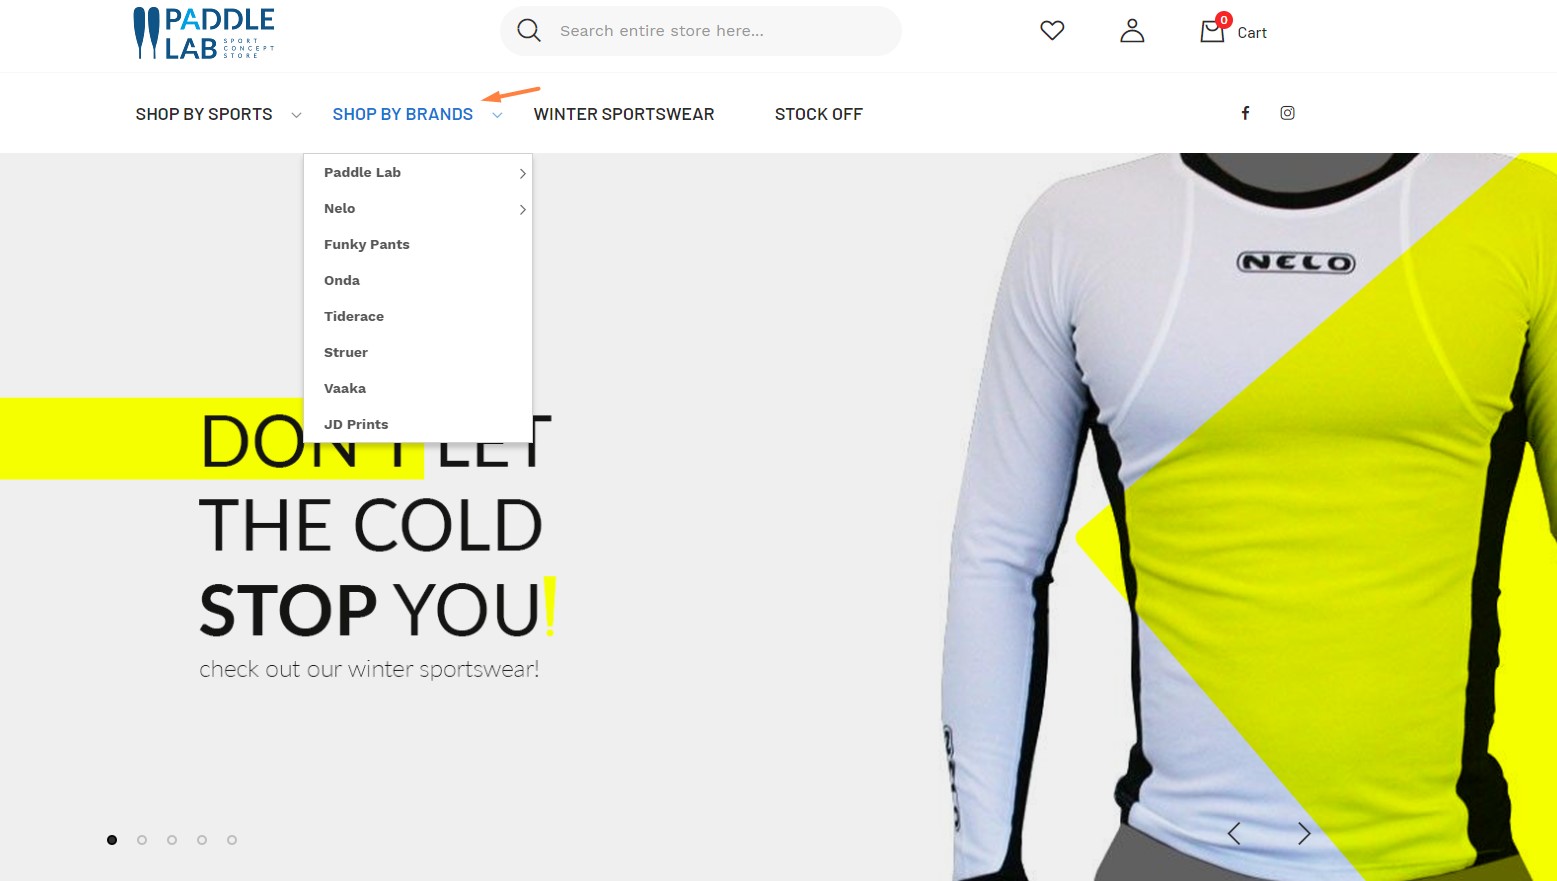 Magento 2 Shop by Brand Functionality | MageWorx Blog